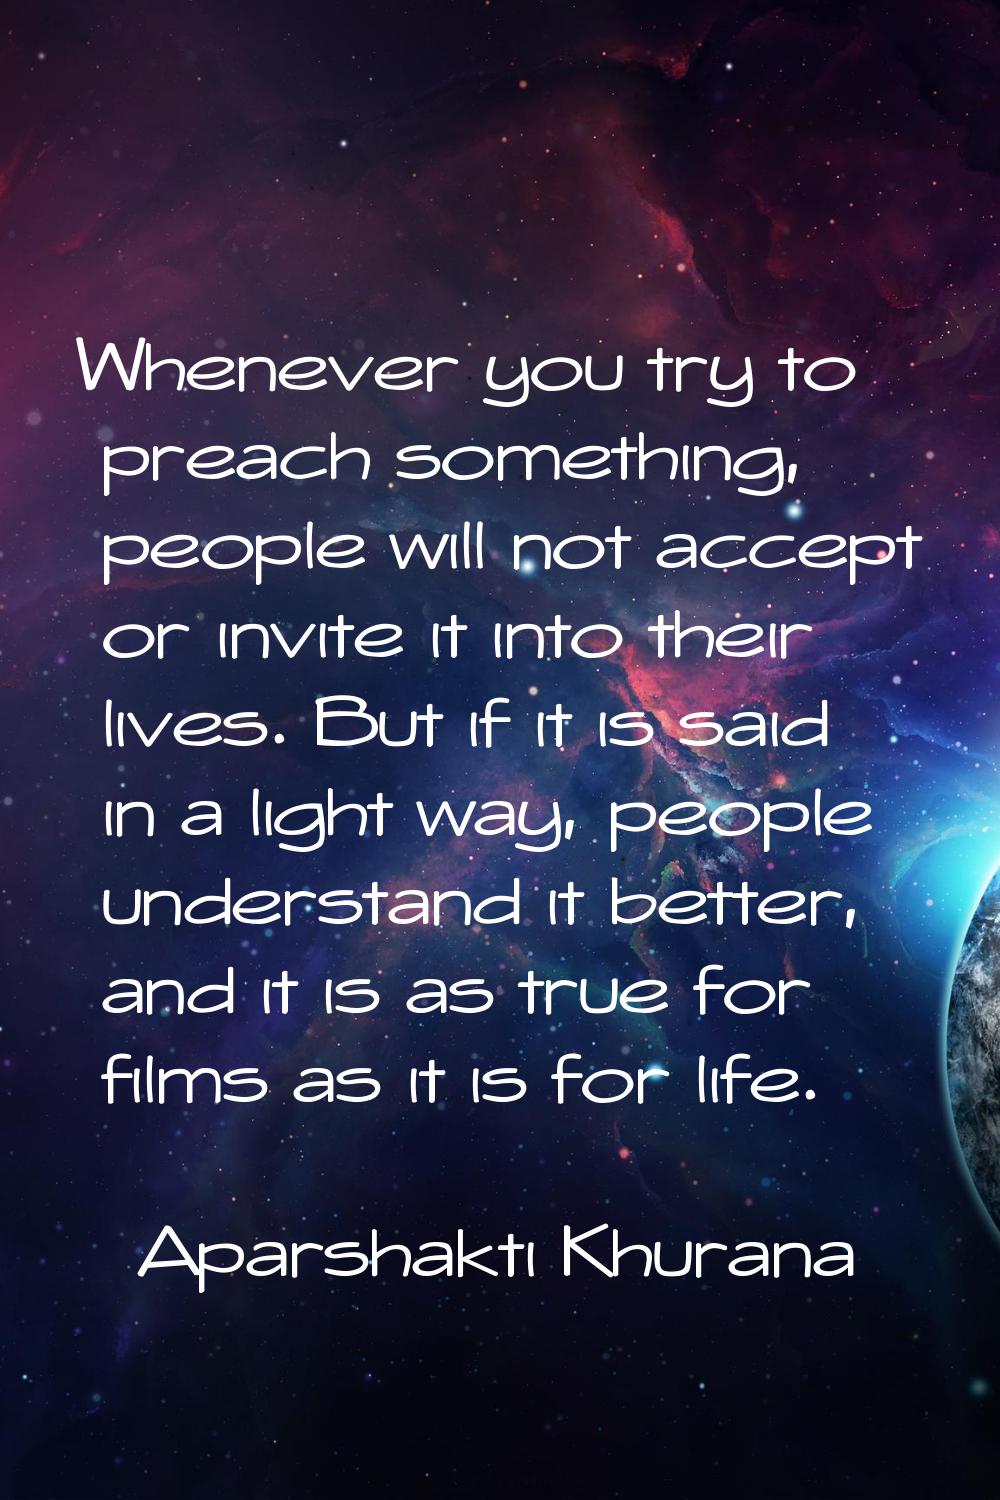 Whenever you try to preach something, people will not accept or invite it into their lives. But if 